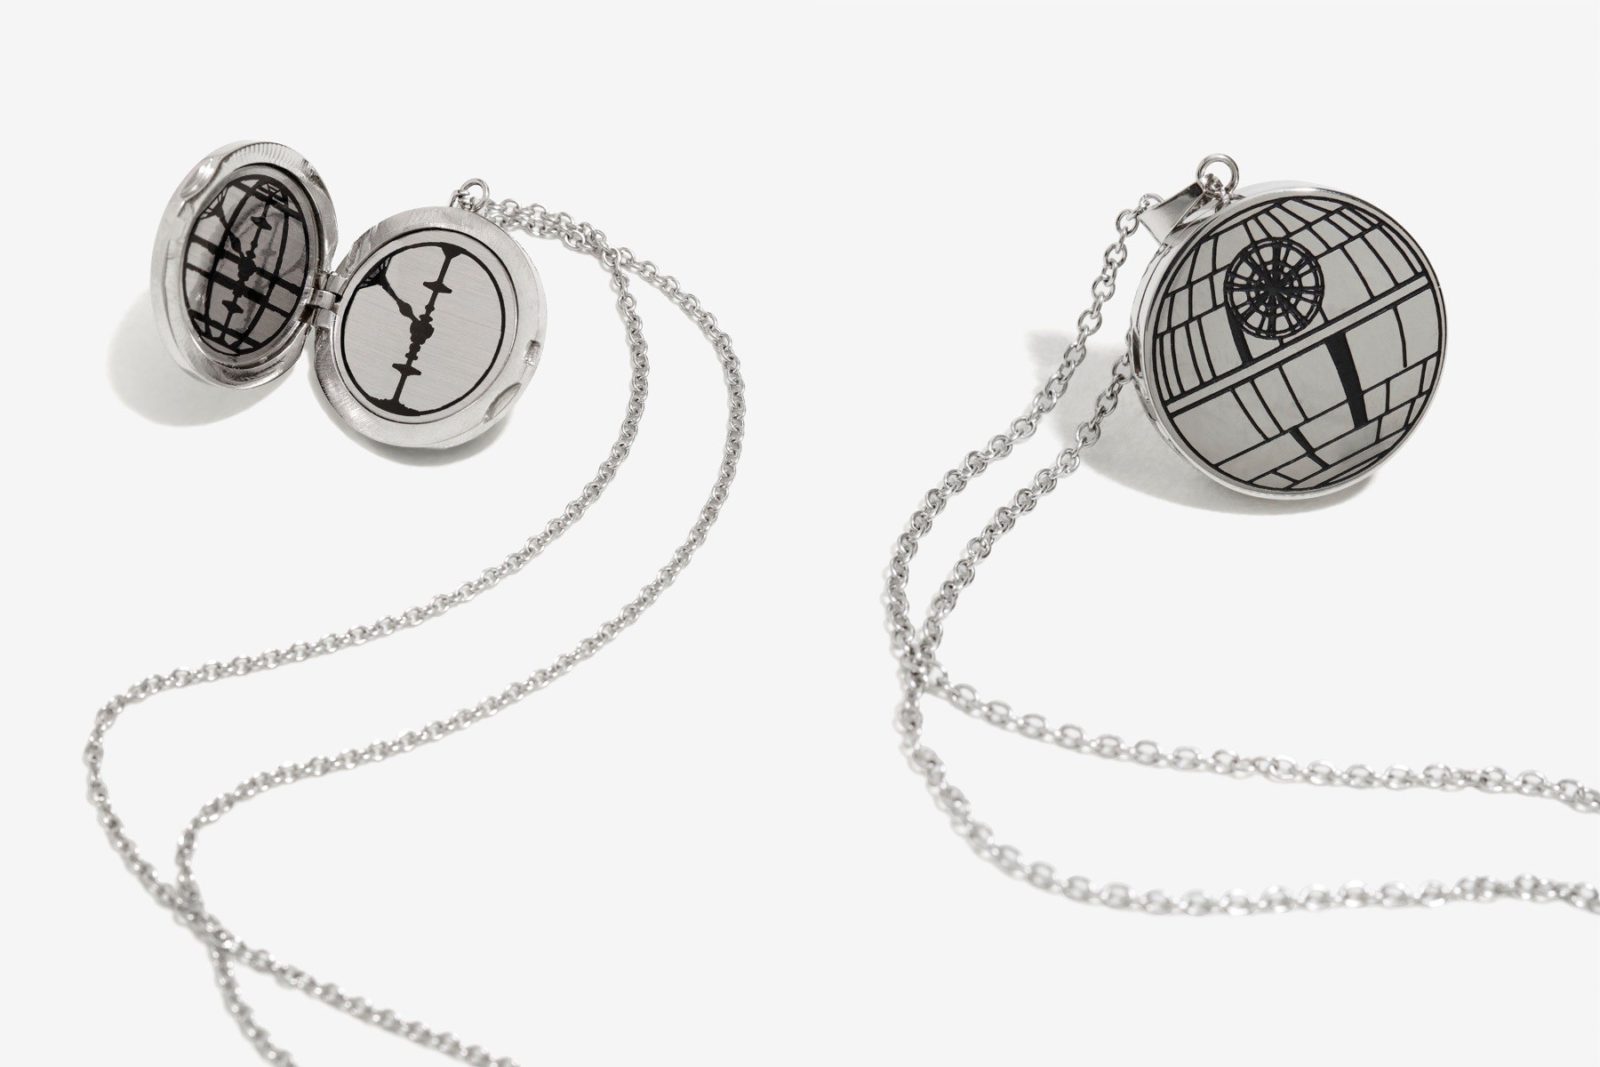 New Rogue One Death Star locket necklace